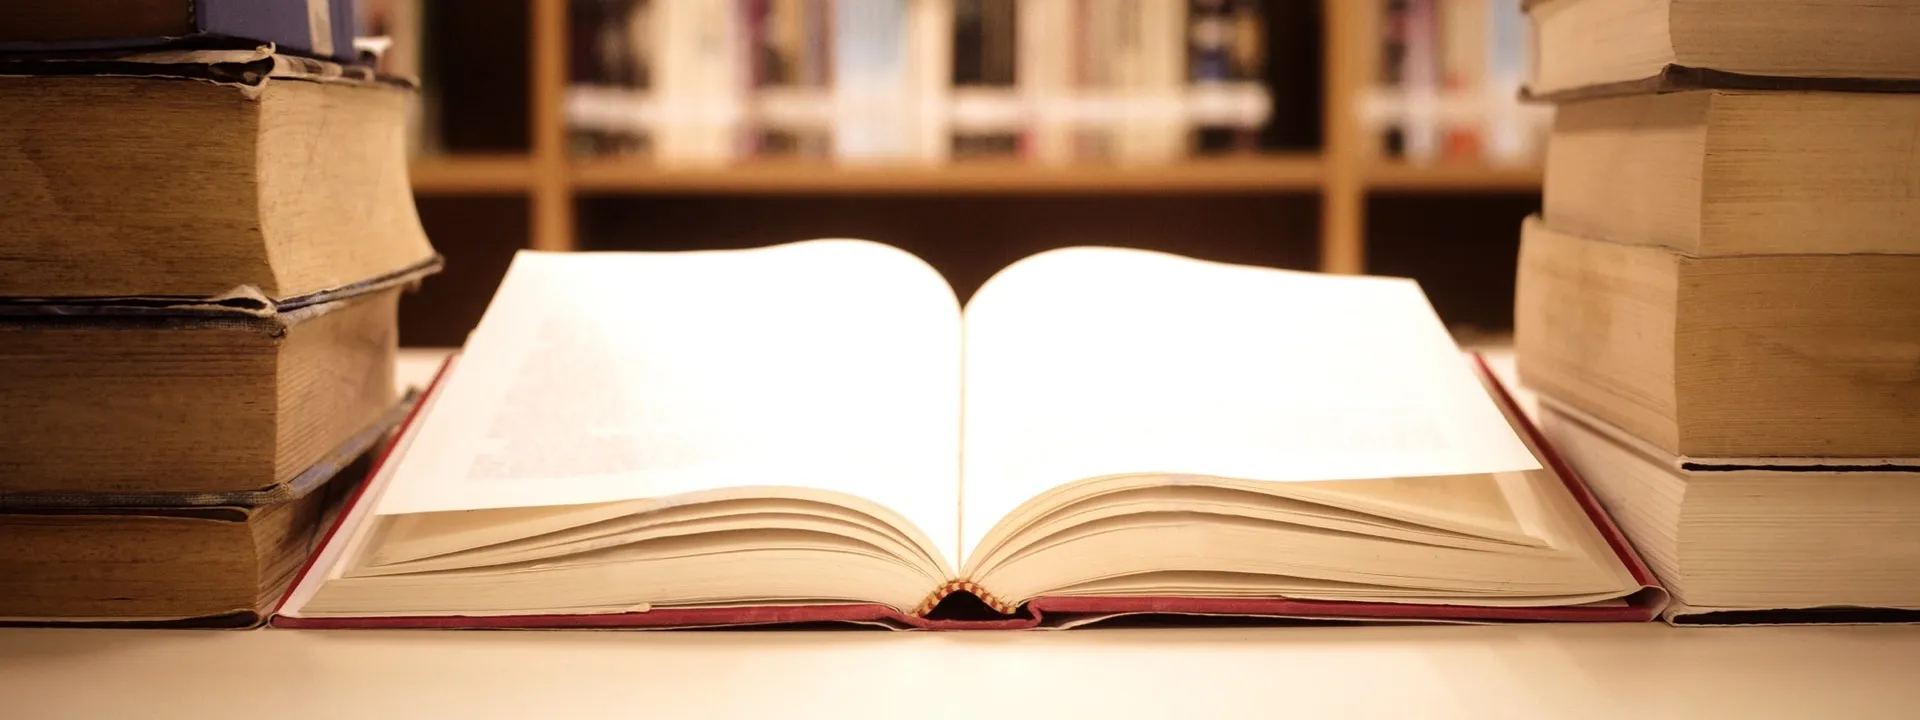 7 Clever Ways to Save Money on Your University Textbooks